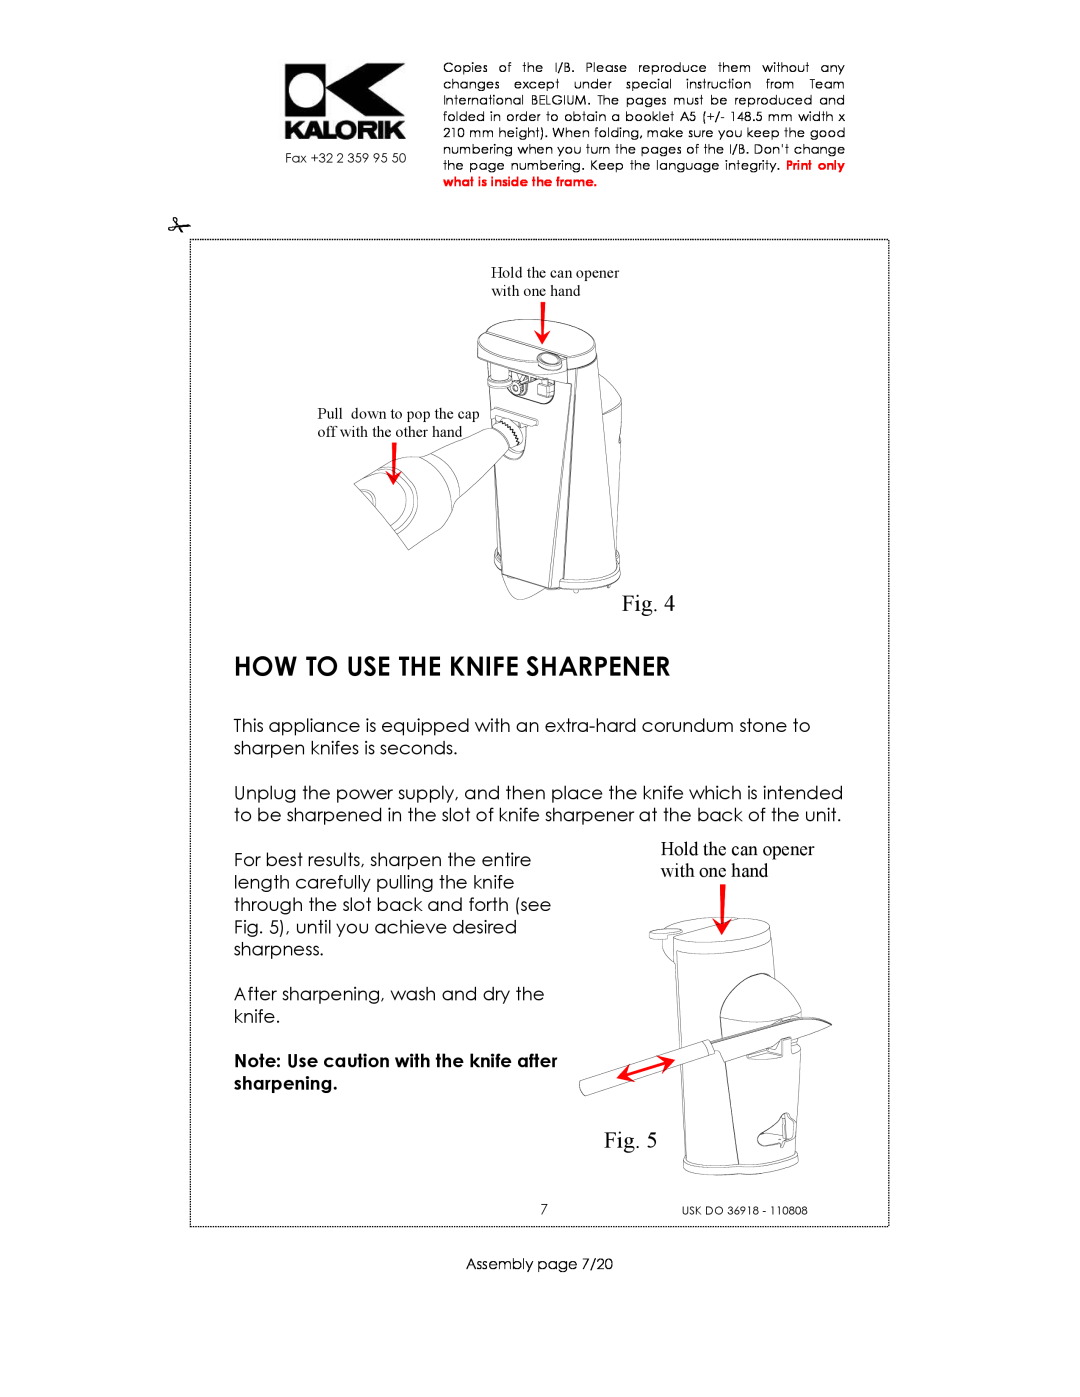 Kalorik USK DO 36918 manual How To Use The Knife Sharpener, Note Use caution with the knife after sharpening 